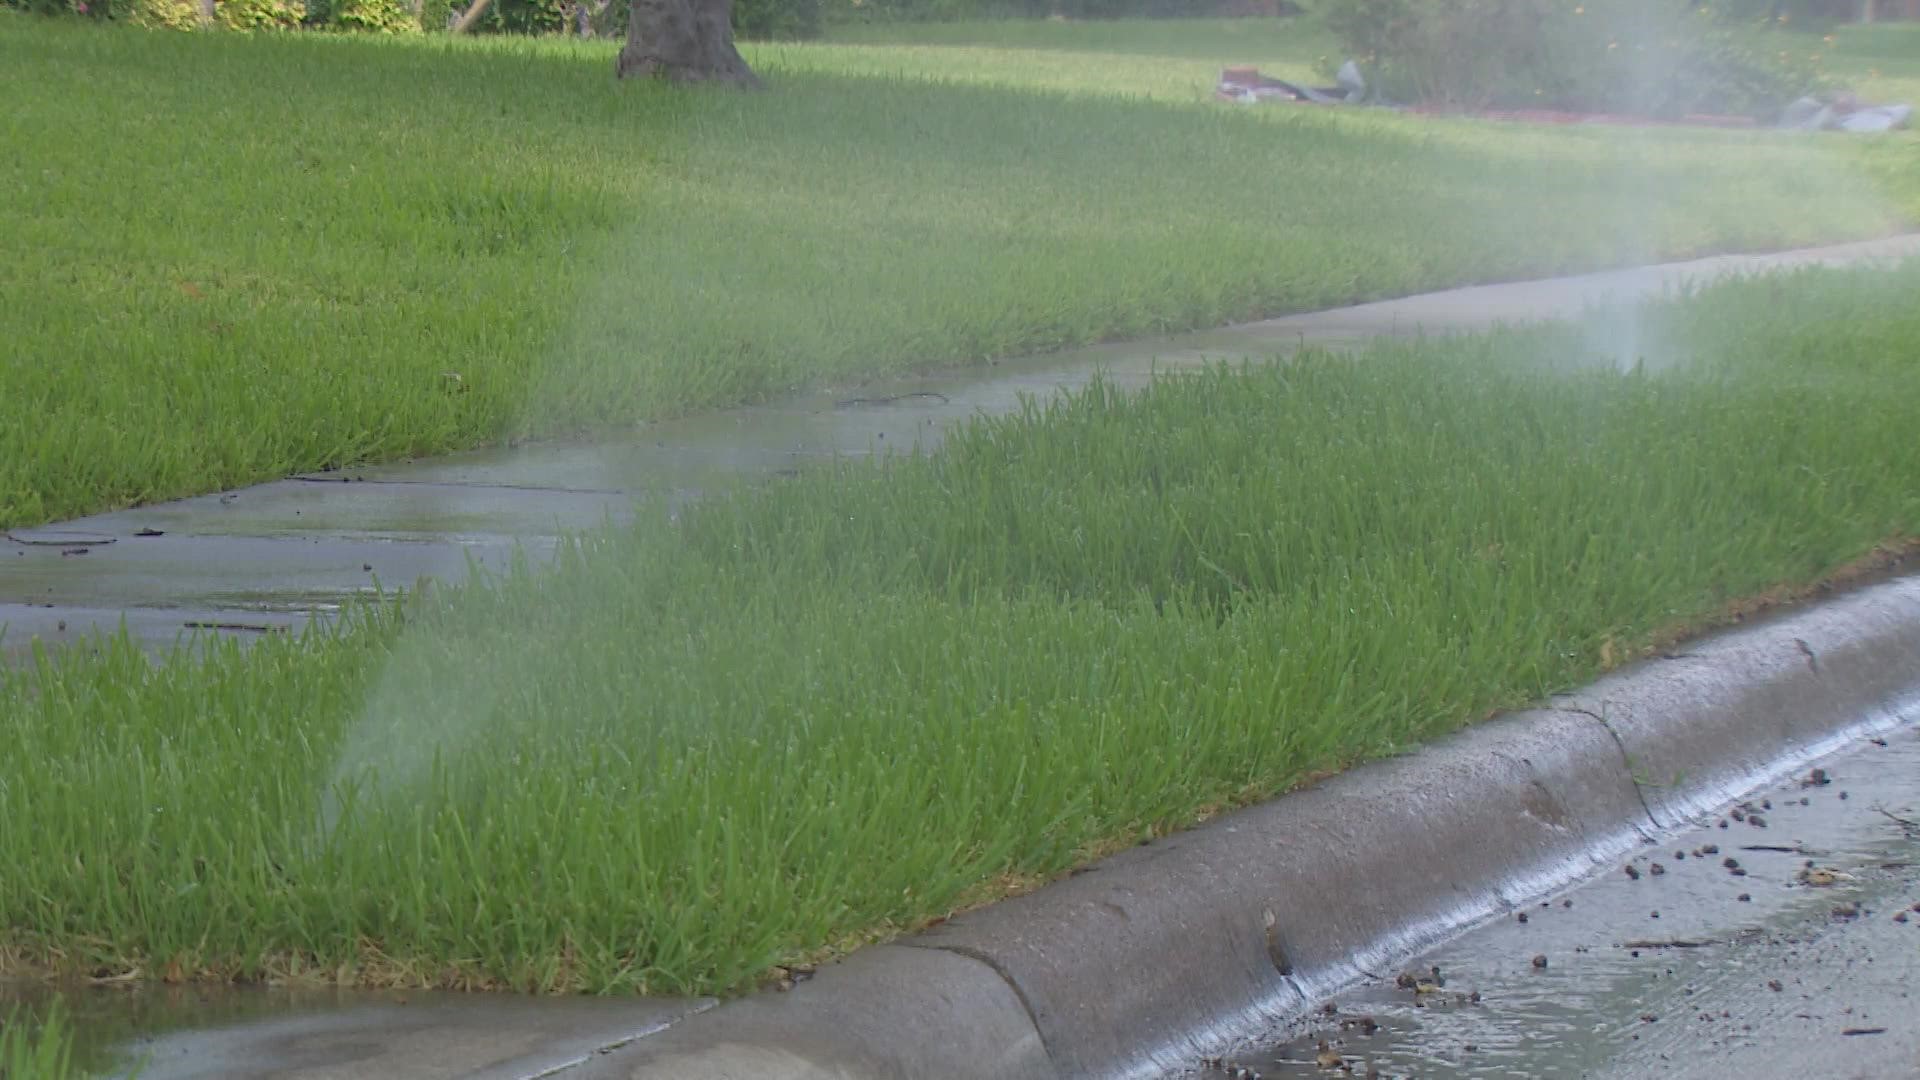 North Texans are struggling to keep their lawns, and themselves, hydrated amid a stretch of heat.